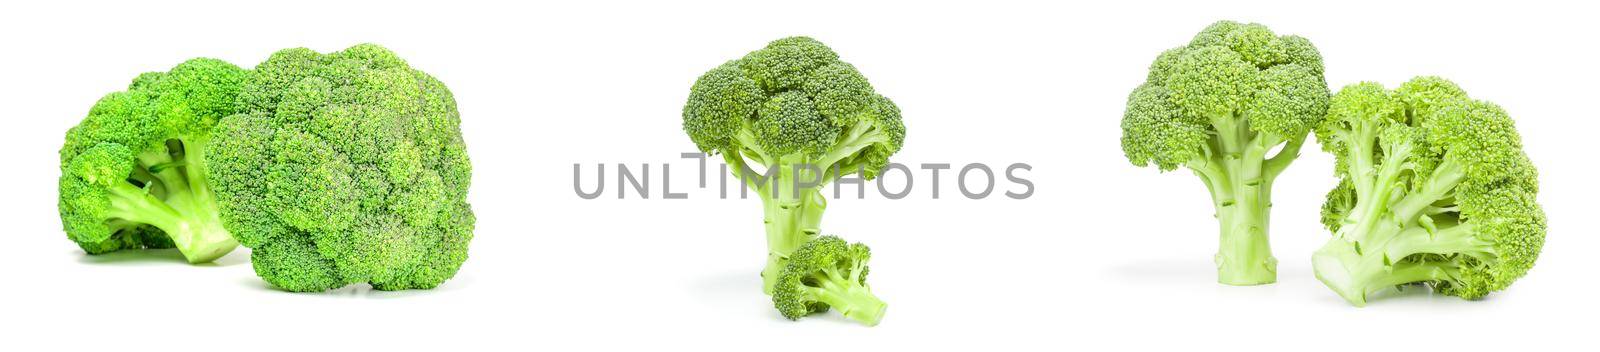 Collage of fresh green broccoli over a white background by Proff